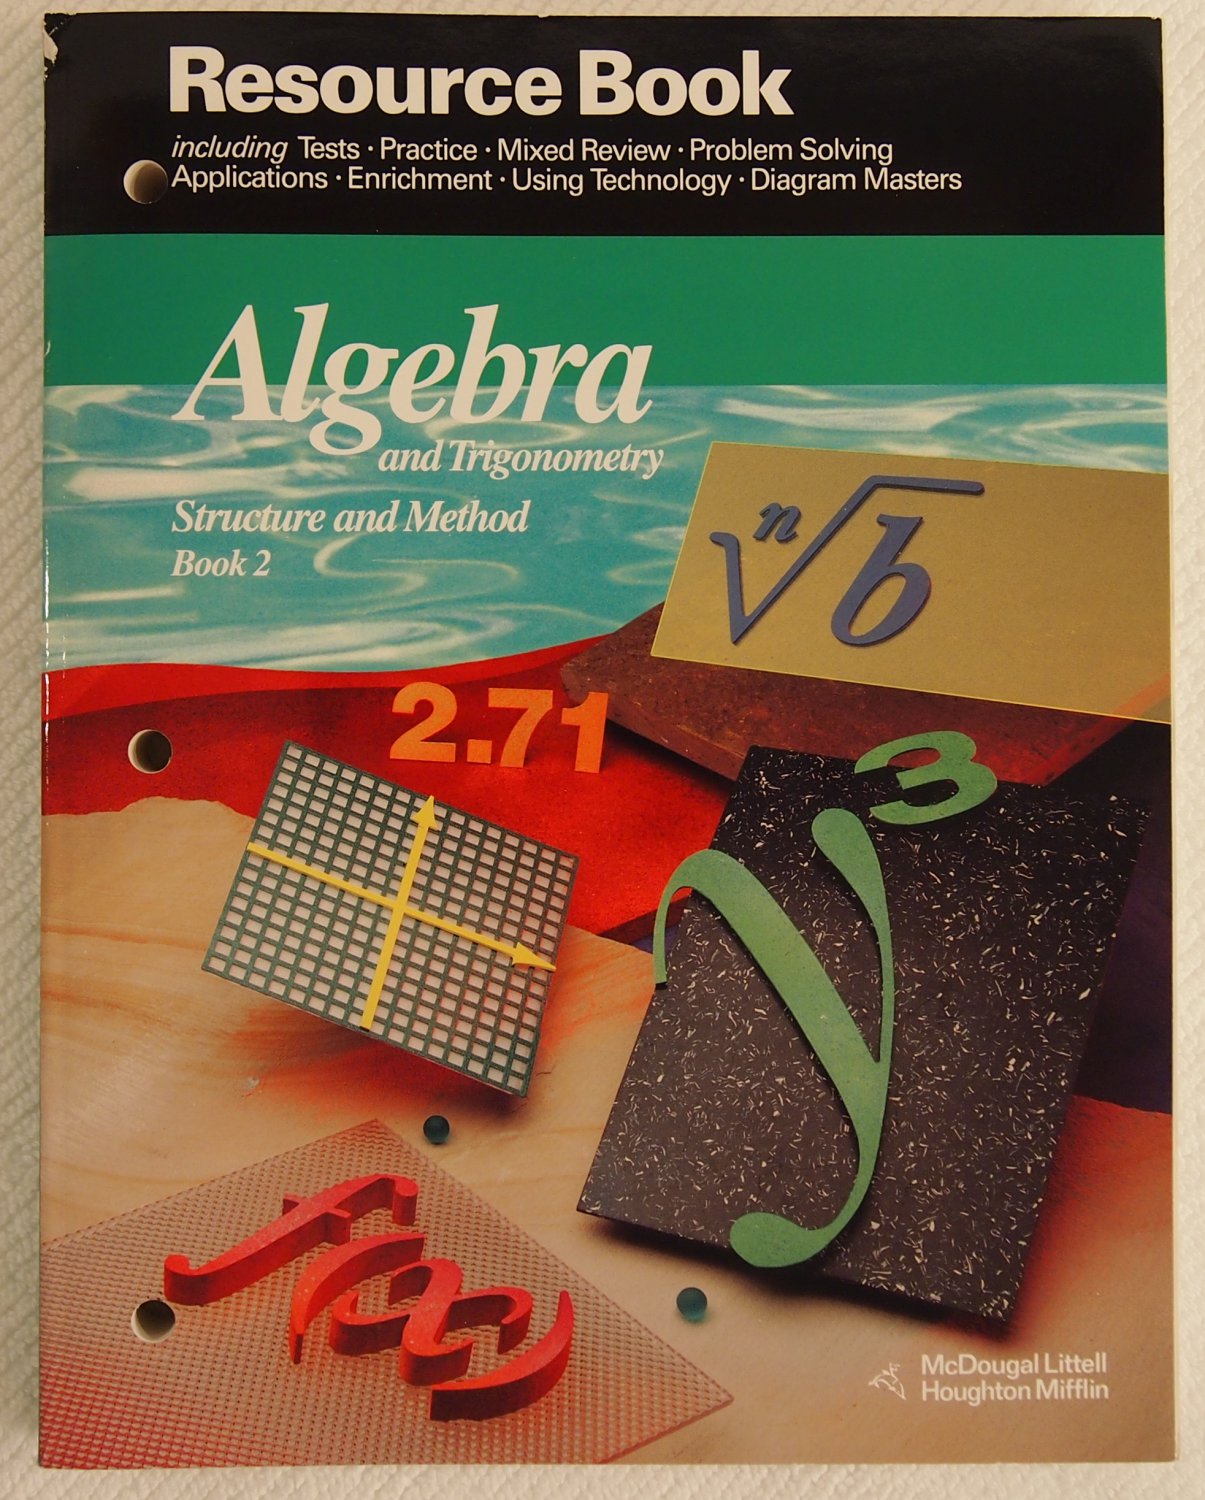 83 List Algebra Structure And Method Book 1 Online Book for Learn